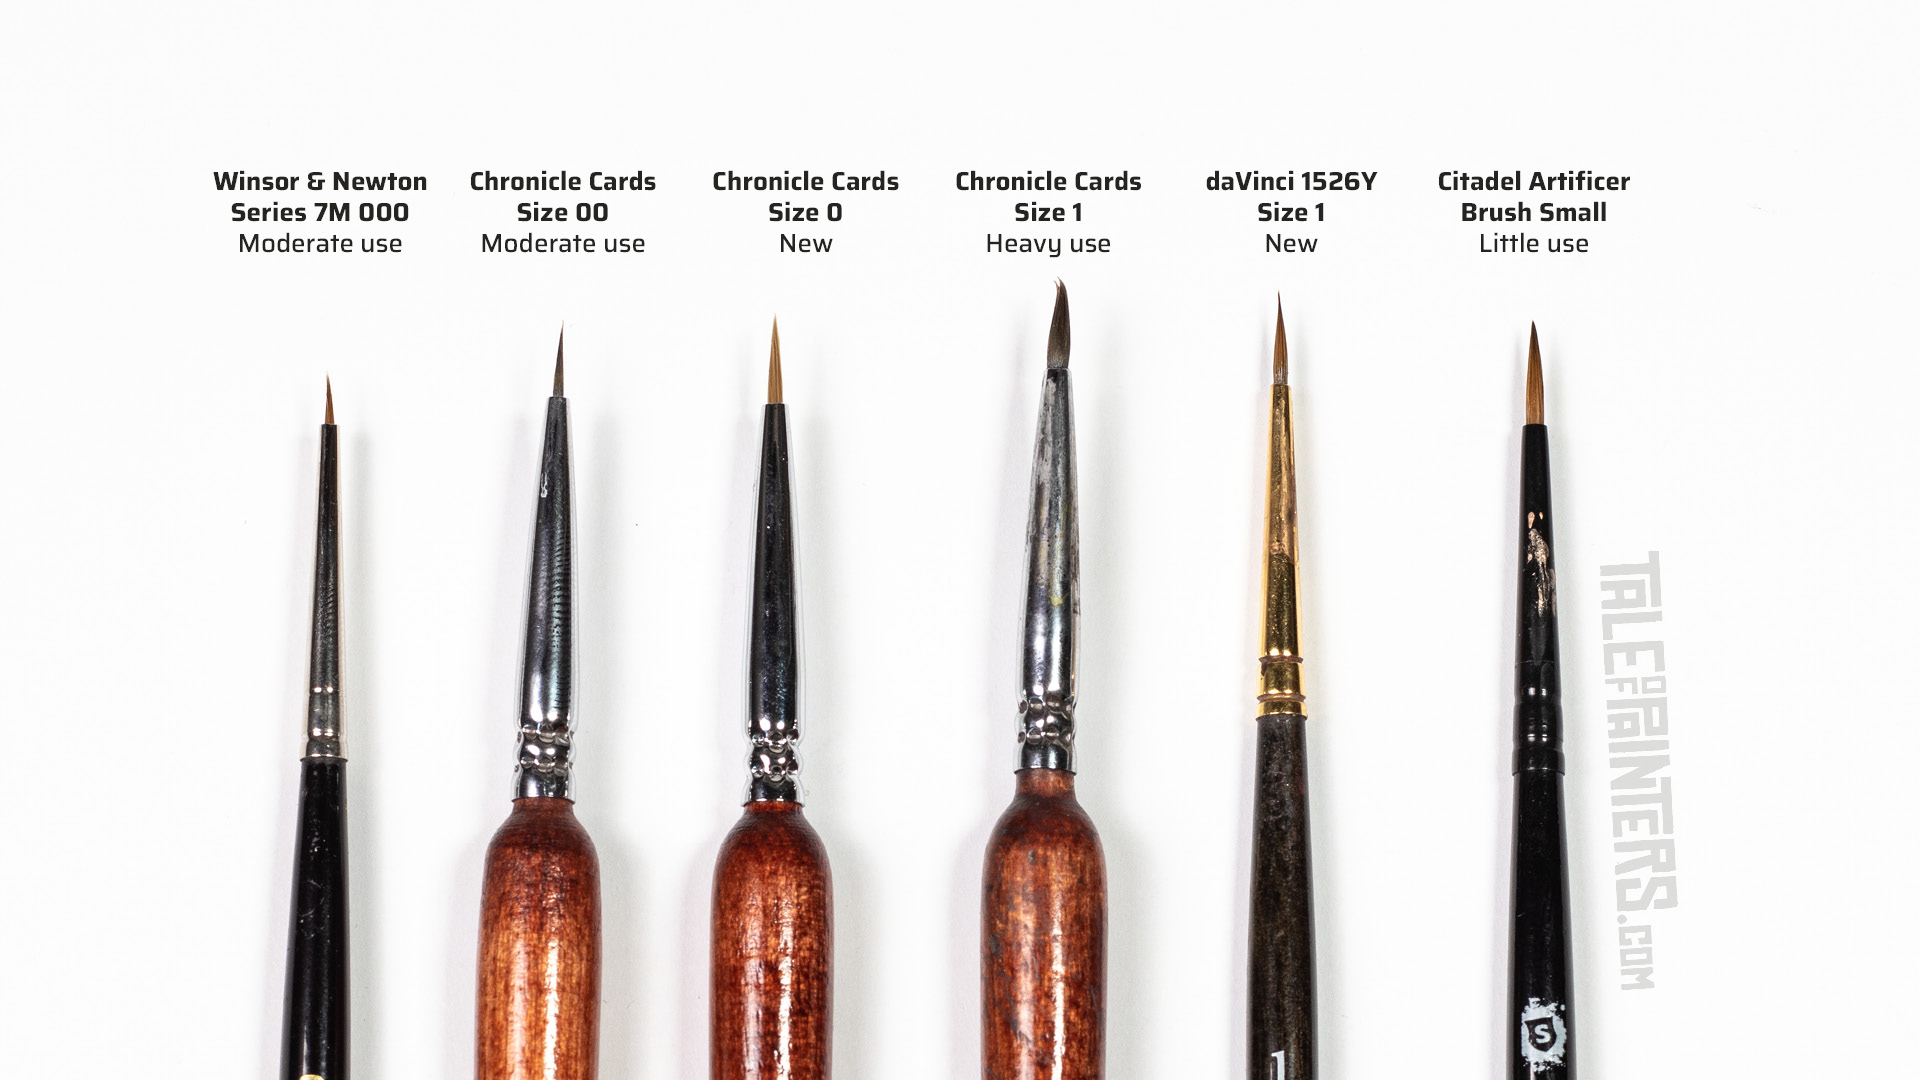 Comparison of Chronicle Cards' Wolf Bristles brushes with Winsor & Newton, daVinci and Citadel